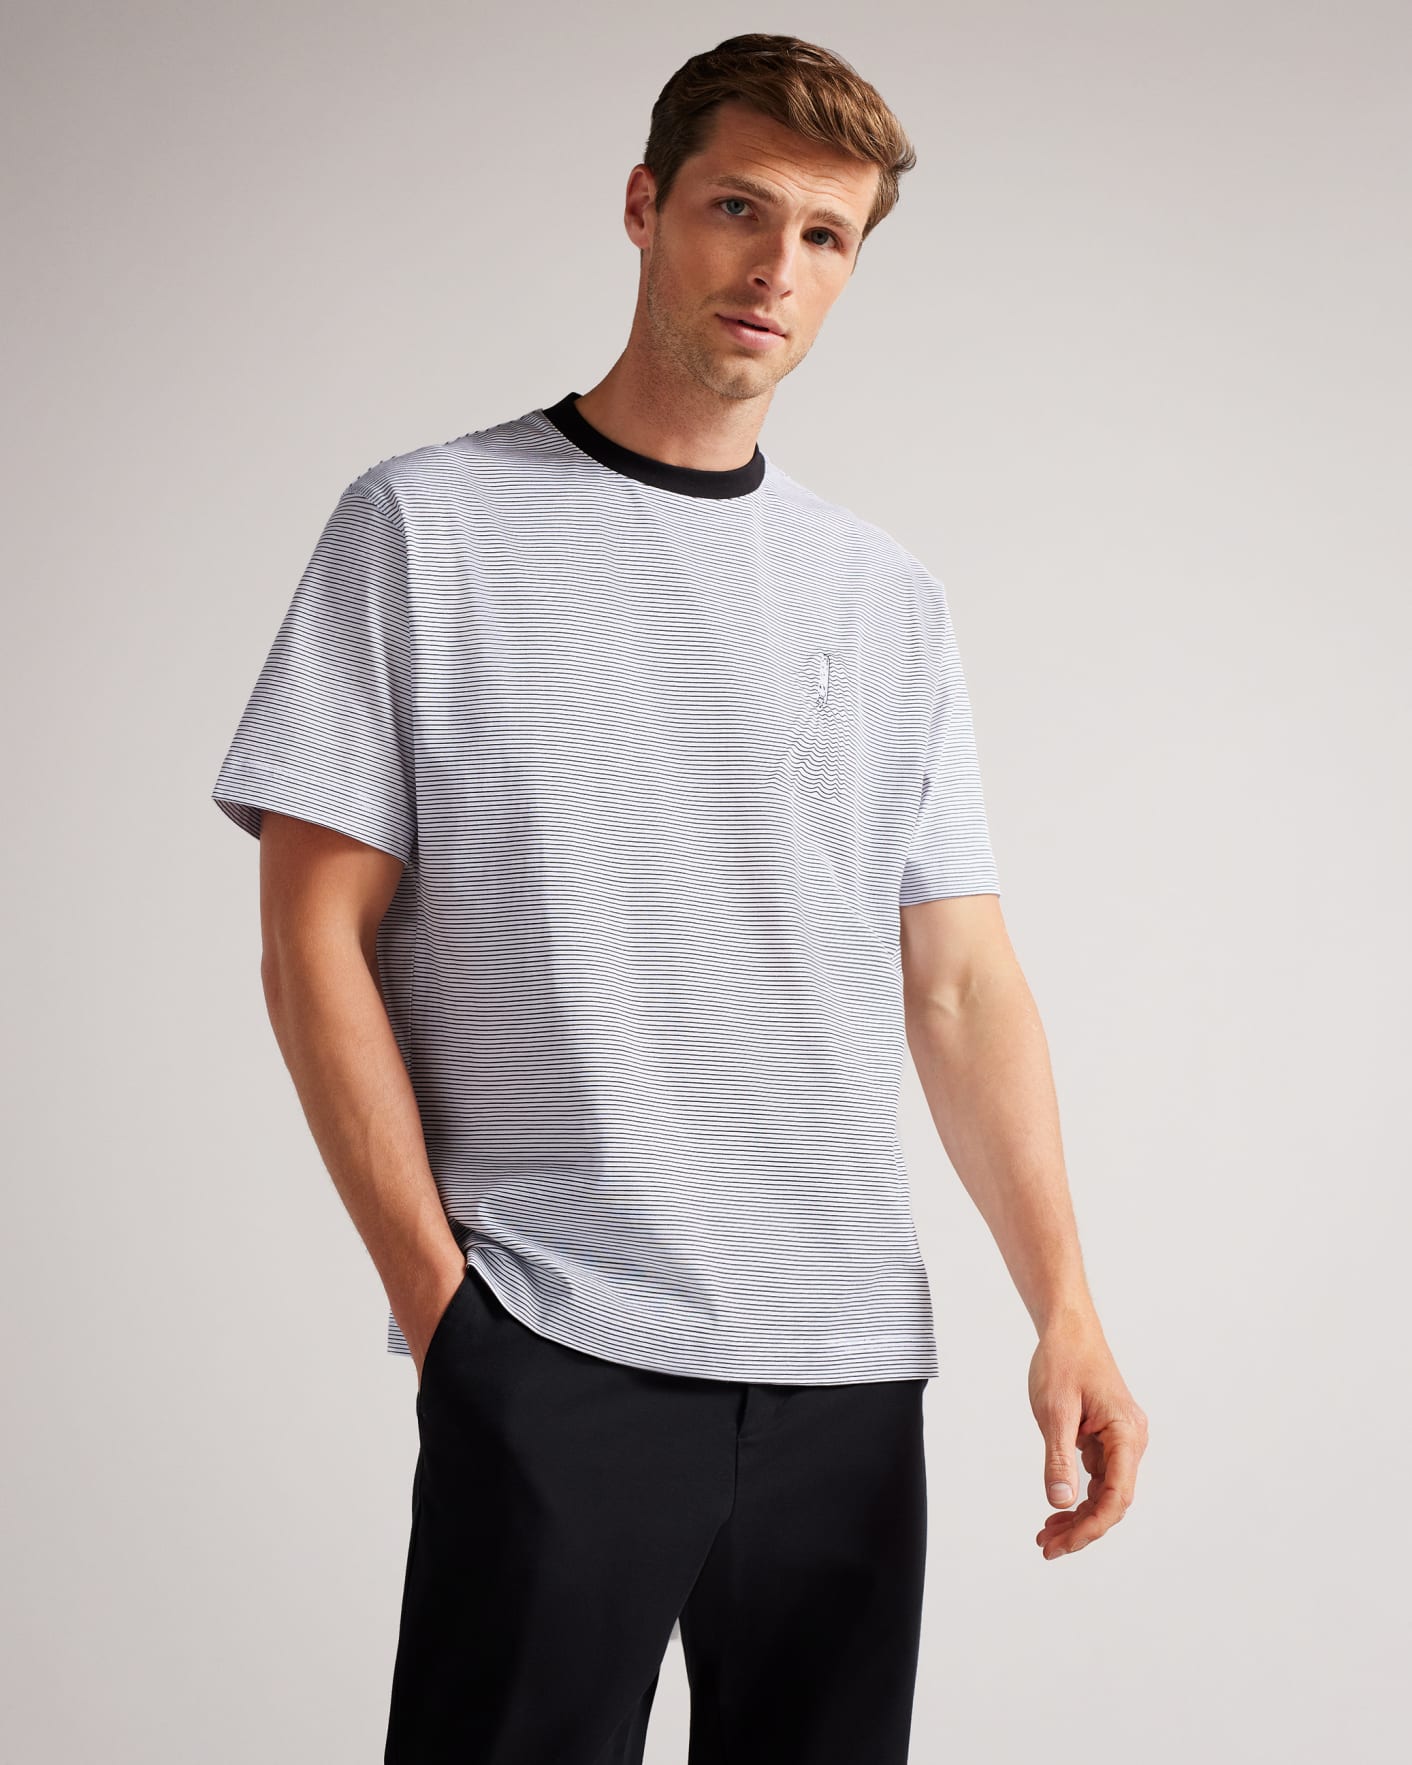 White Short Sleeve Sublimation Printed T-Shirt Ted Baker